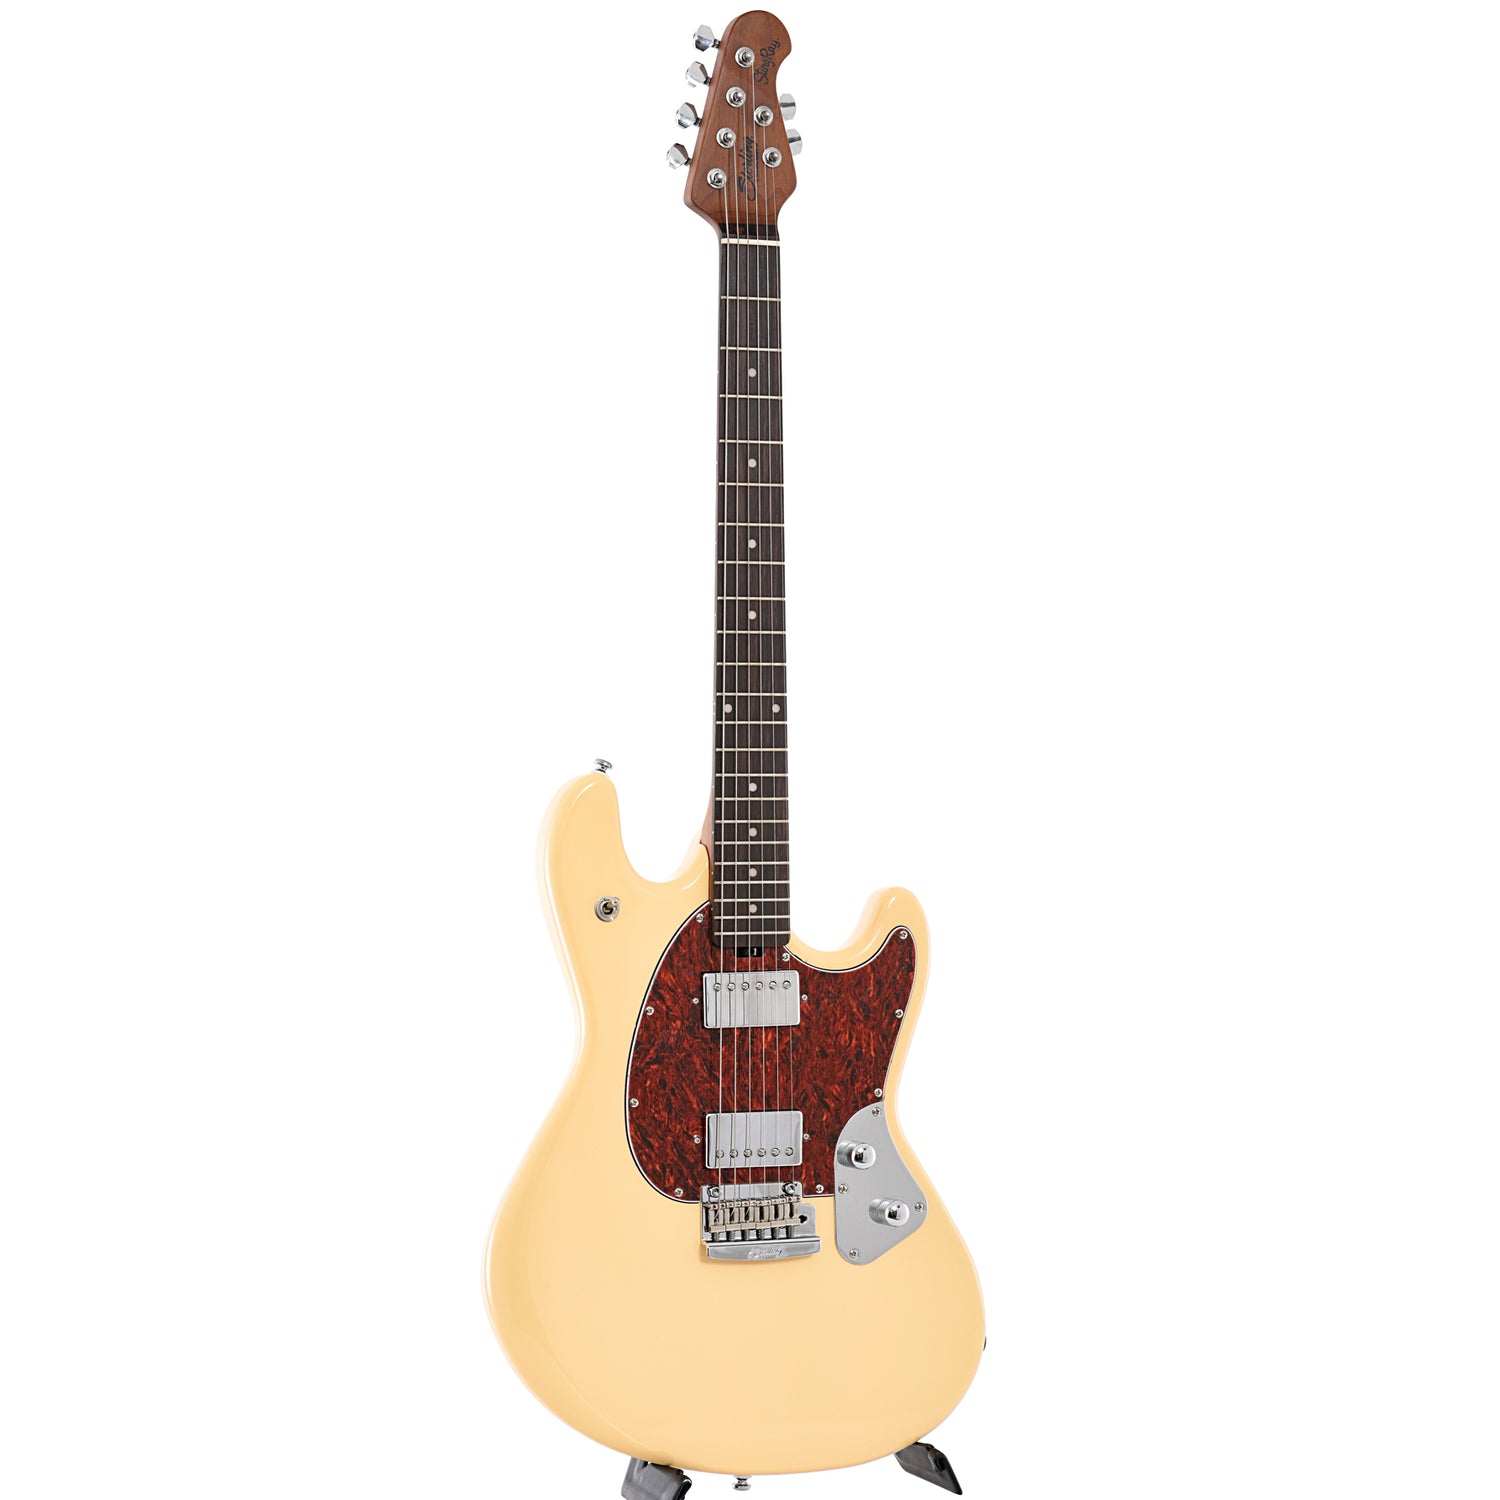 Image 11 of Sterling by Music Man Stingray SR50 Electric Guitar, Buttermilk- SKU# SR50-BM : Product Type Solid Body Electric Guitars : Elderly Instruments